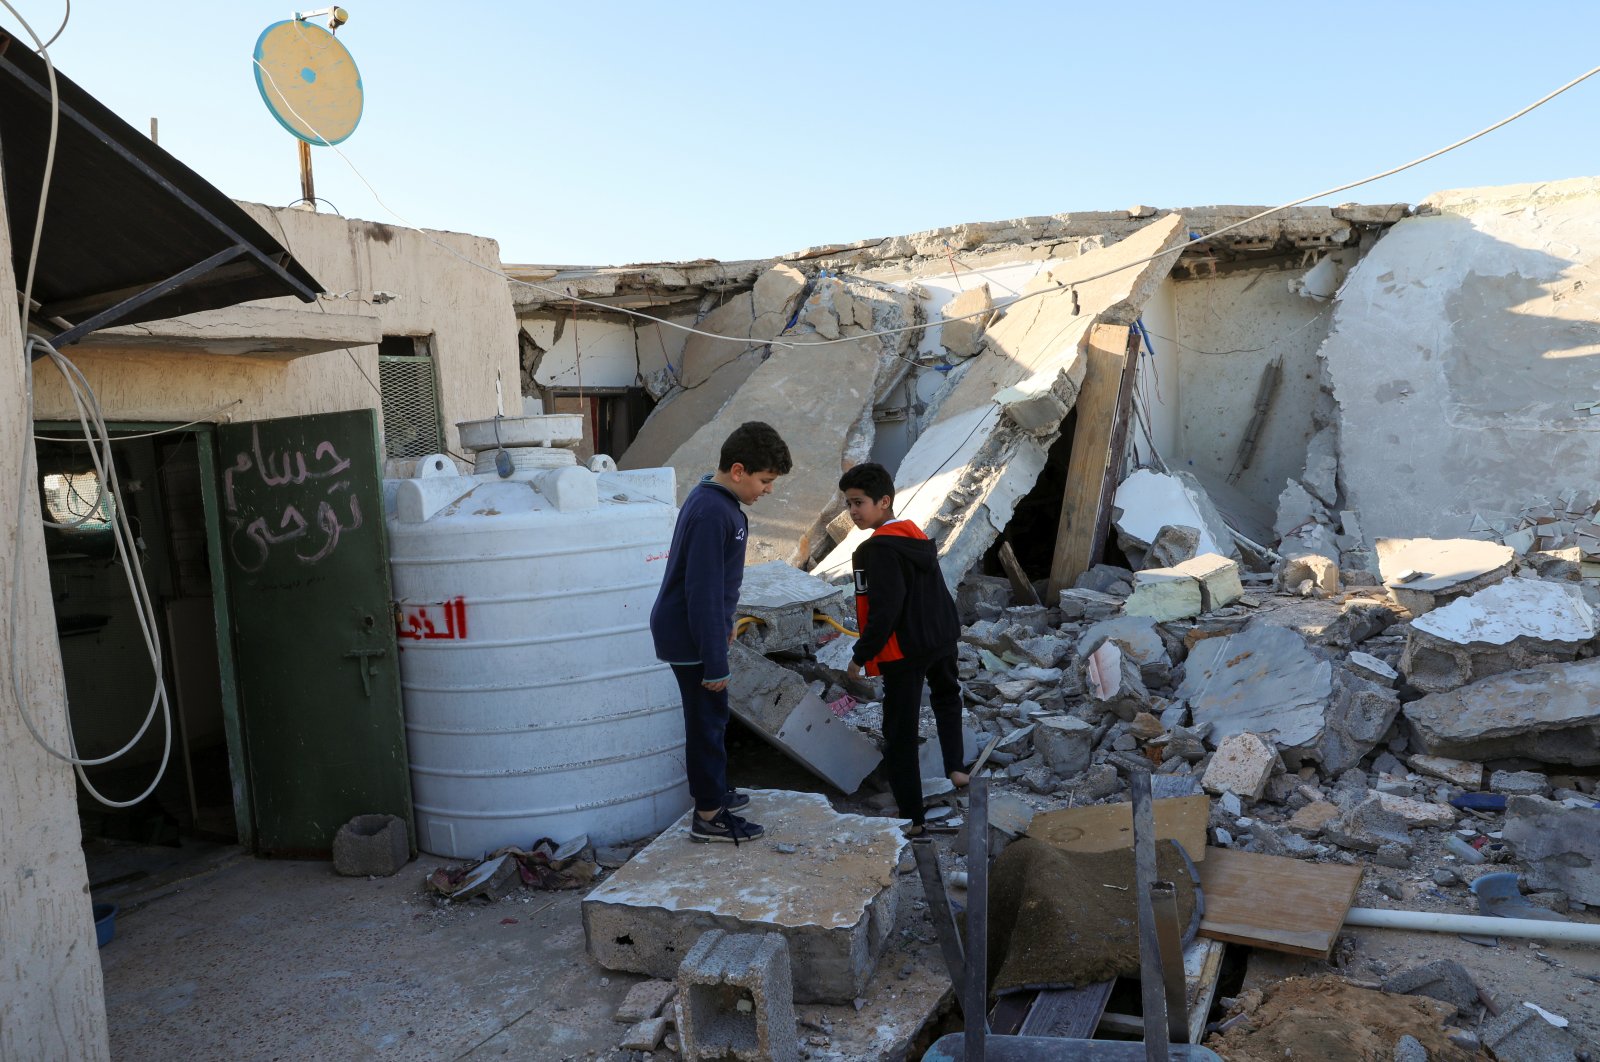 Boys stand near a damaged house after Haftar forces' shelling on a residential area, in Abu Slim district south of Tripoli, Libya February 28, 2020.  (REUTERS Photo)